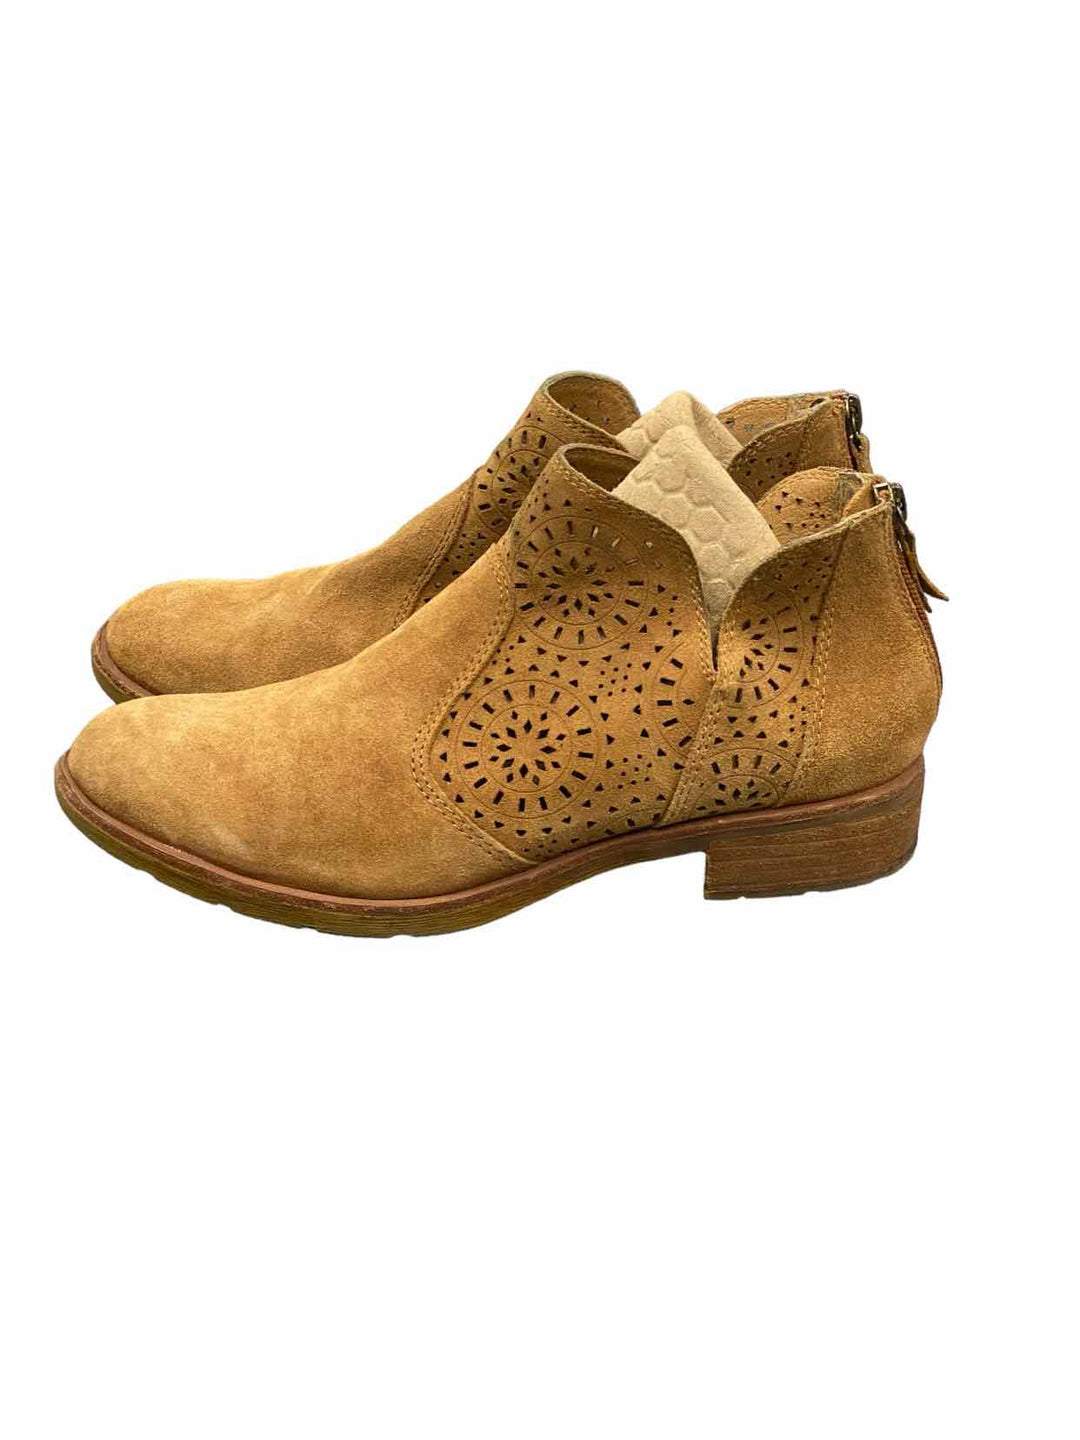 Sofft Shoe Size 9 Tan Leather Boots(Ankle)